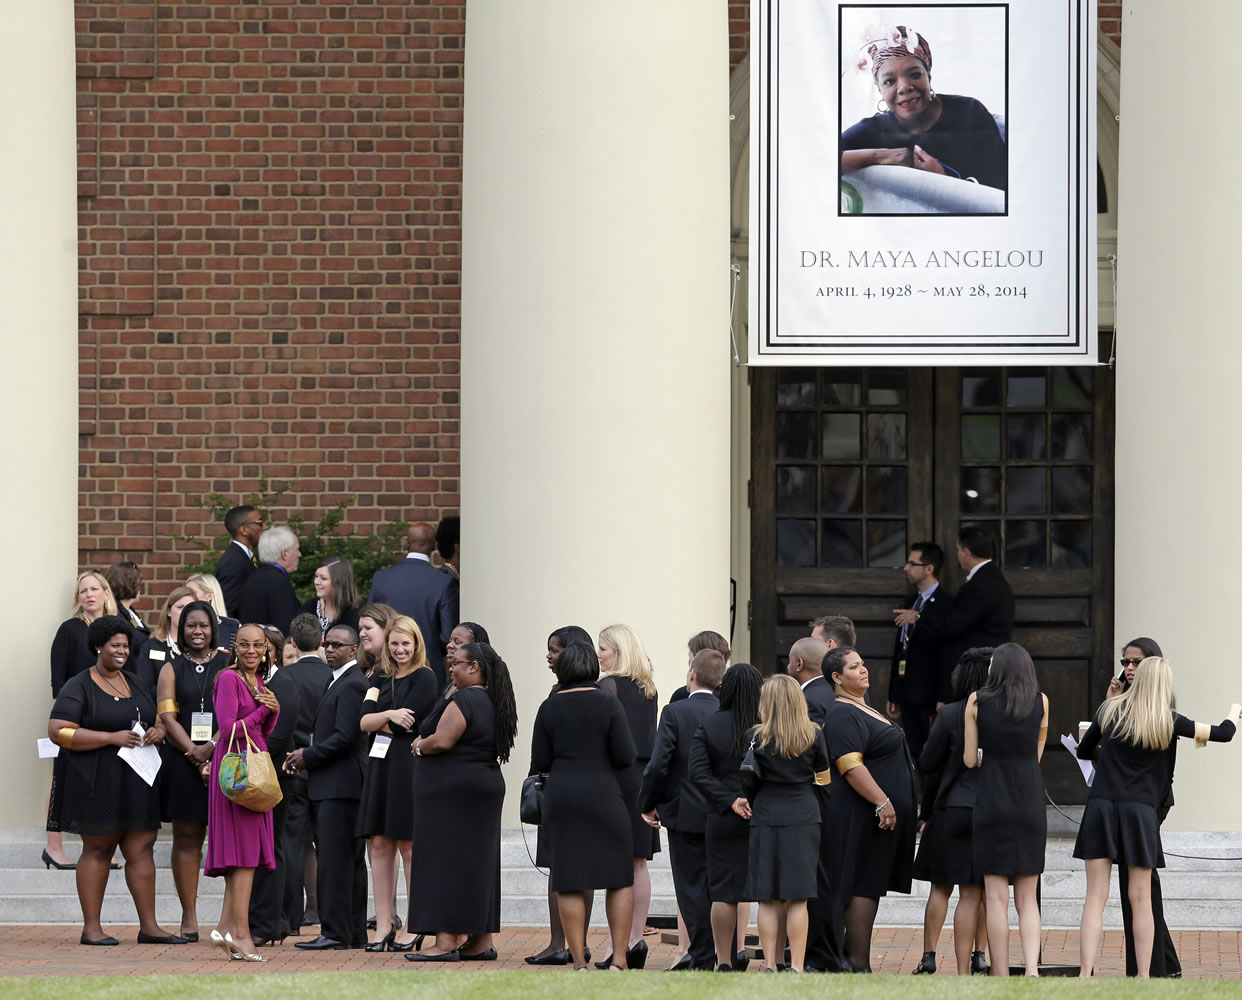 Mourners wait outside Wait Chapel before a memorial service for poet and author Maya Angelou at Wait Chapel at Wake Forest University in Winston-Salem, N.C., on Saturday.